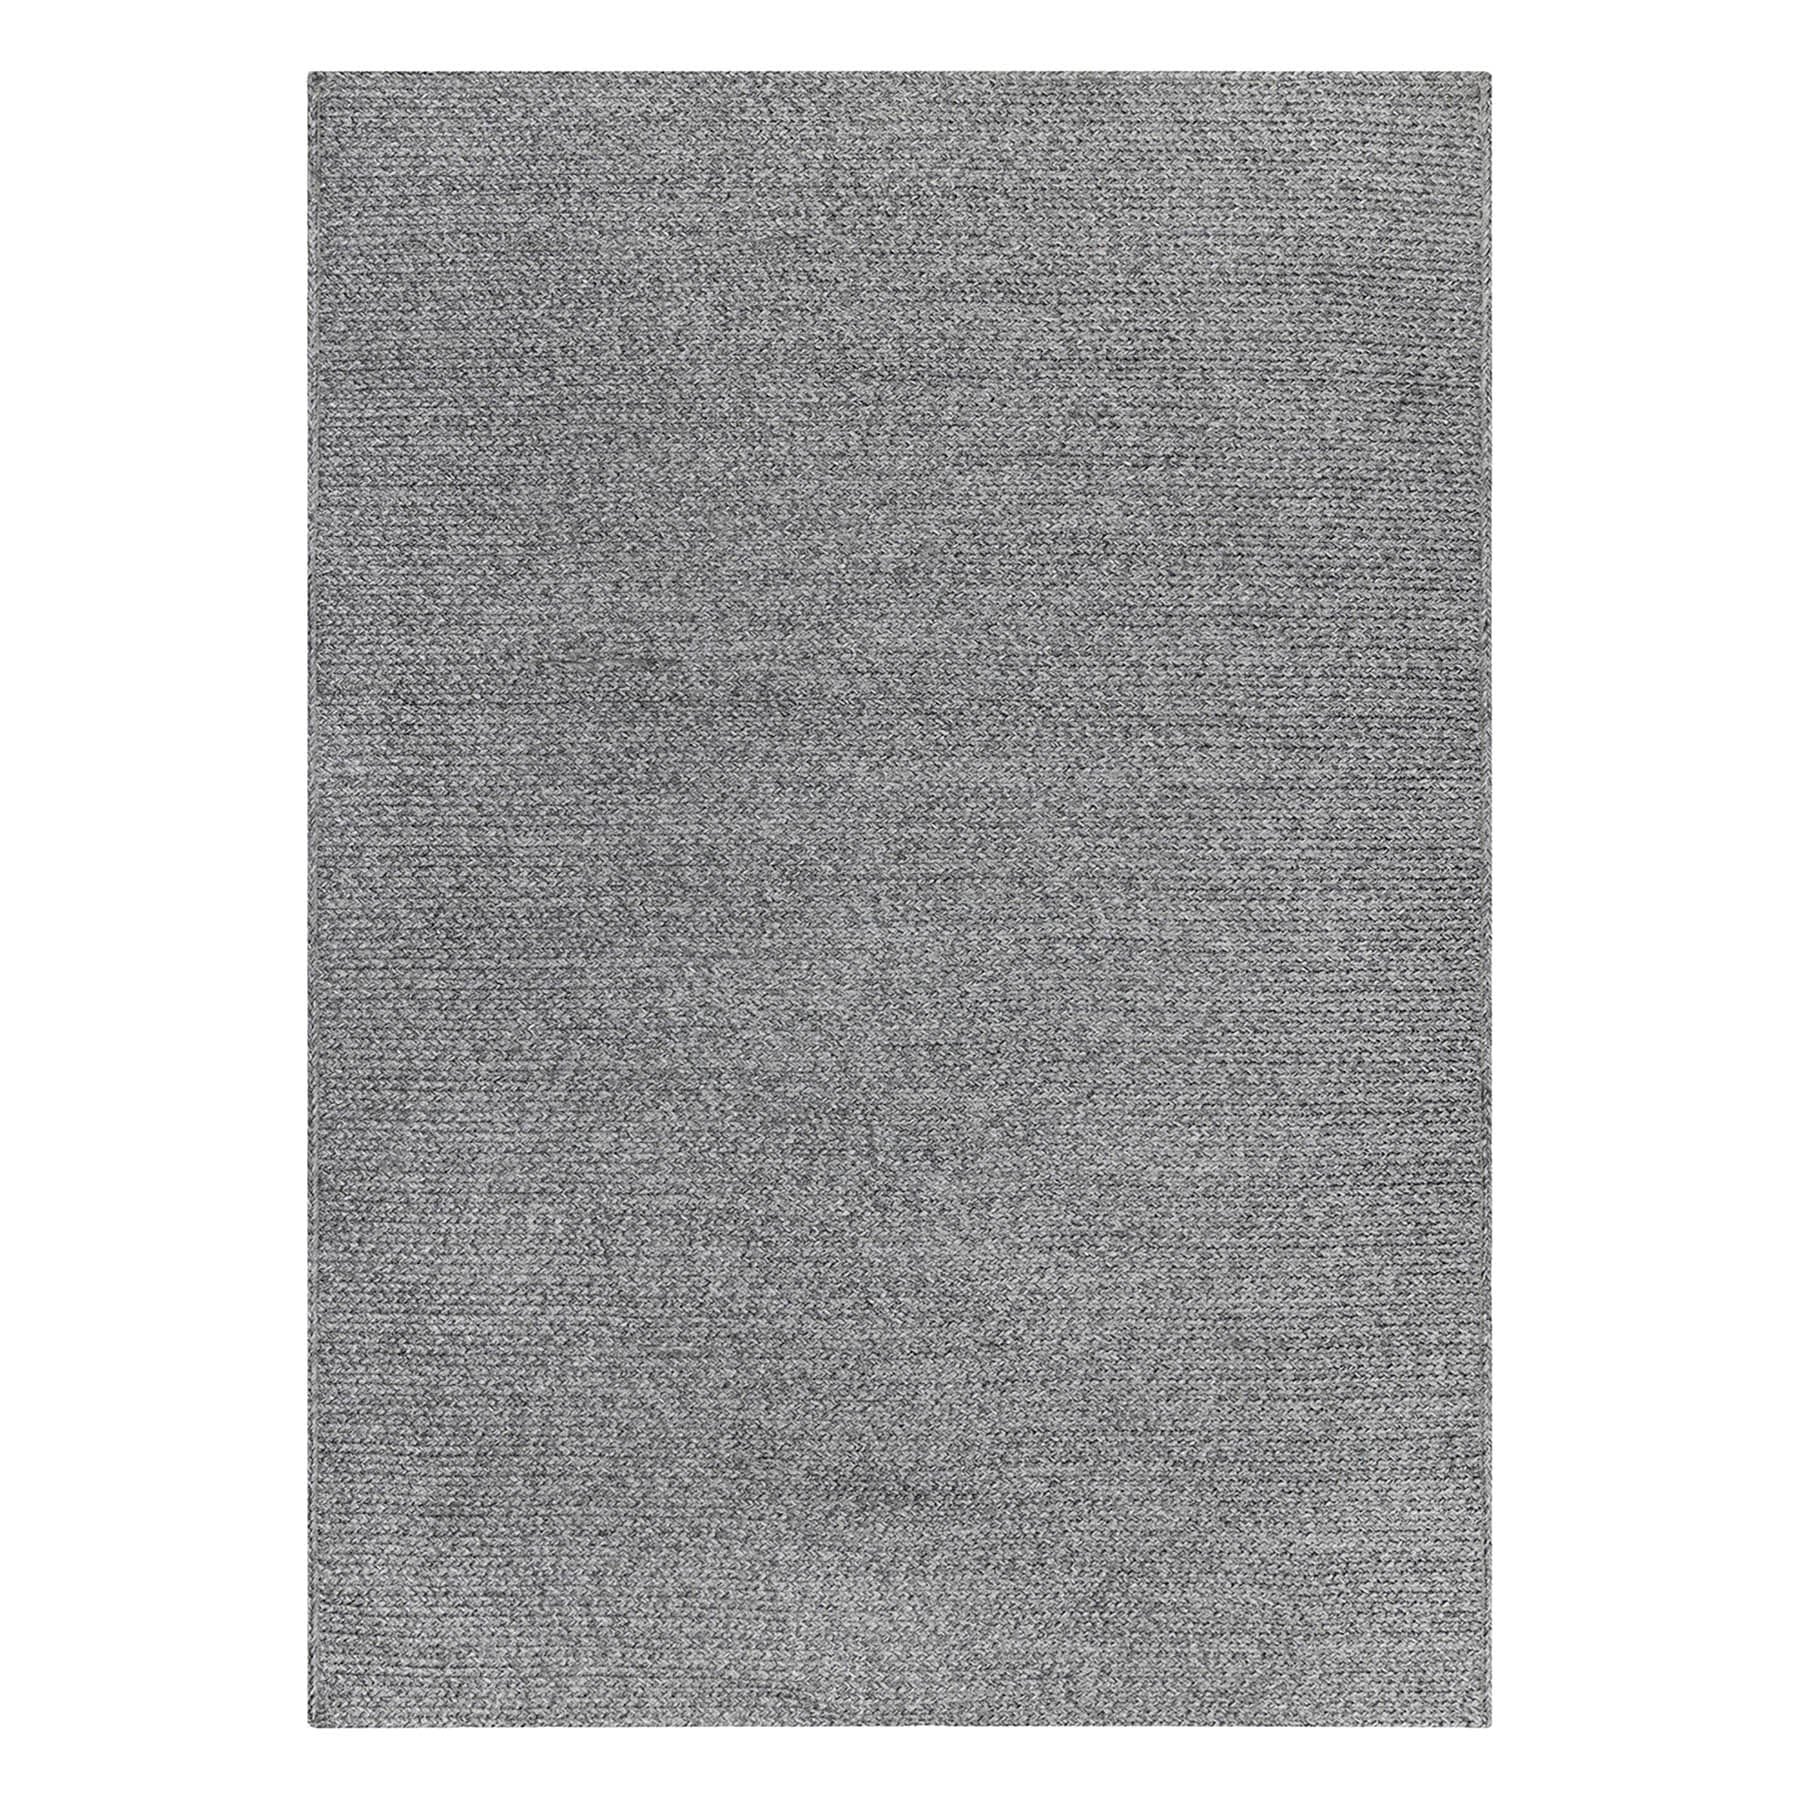 (D518) Heathered Grey Area Rug, 5x7 - nybusiness